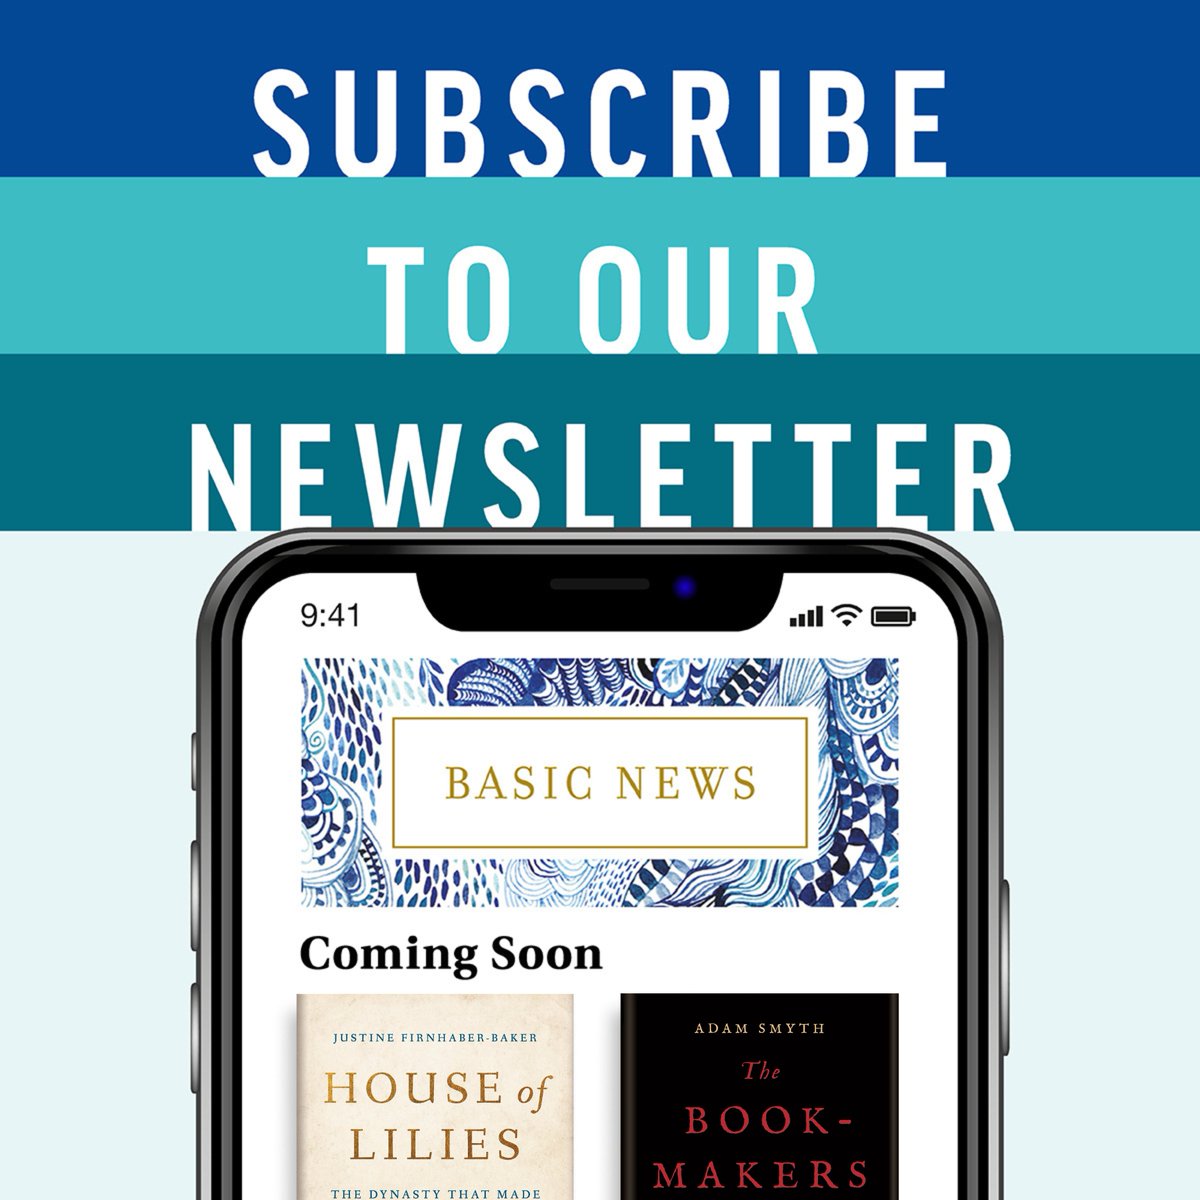 Don’t let this golden opportunity slip away — plug into all the exciting updates from Basic Books this season! Sign up now at basicbooks.com and enjoy a 20% discount on your first purchase 🎉